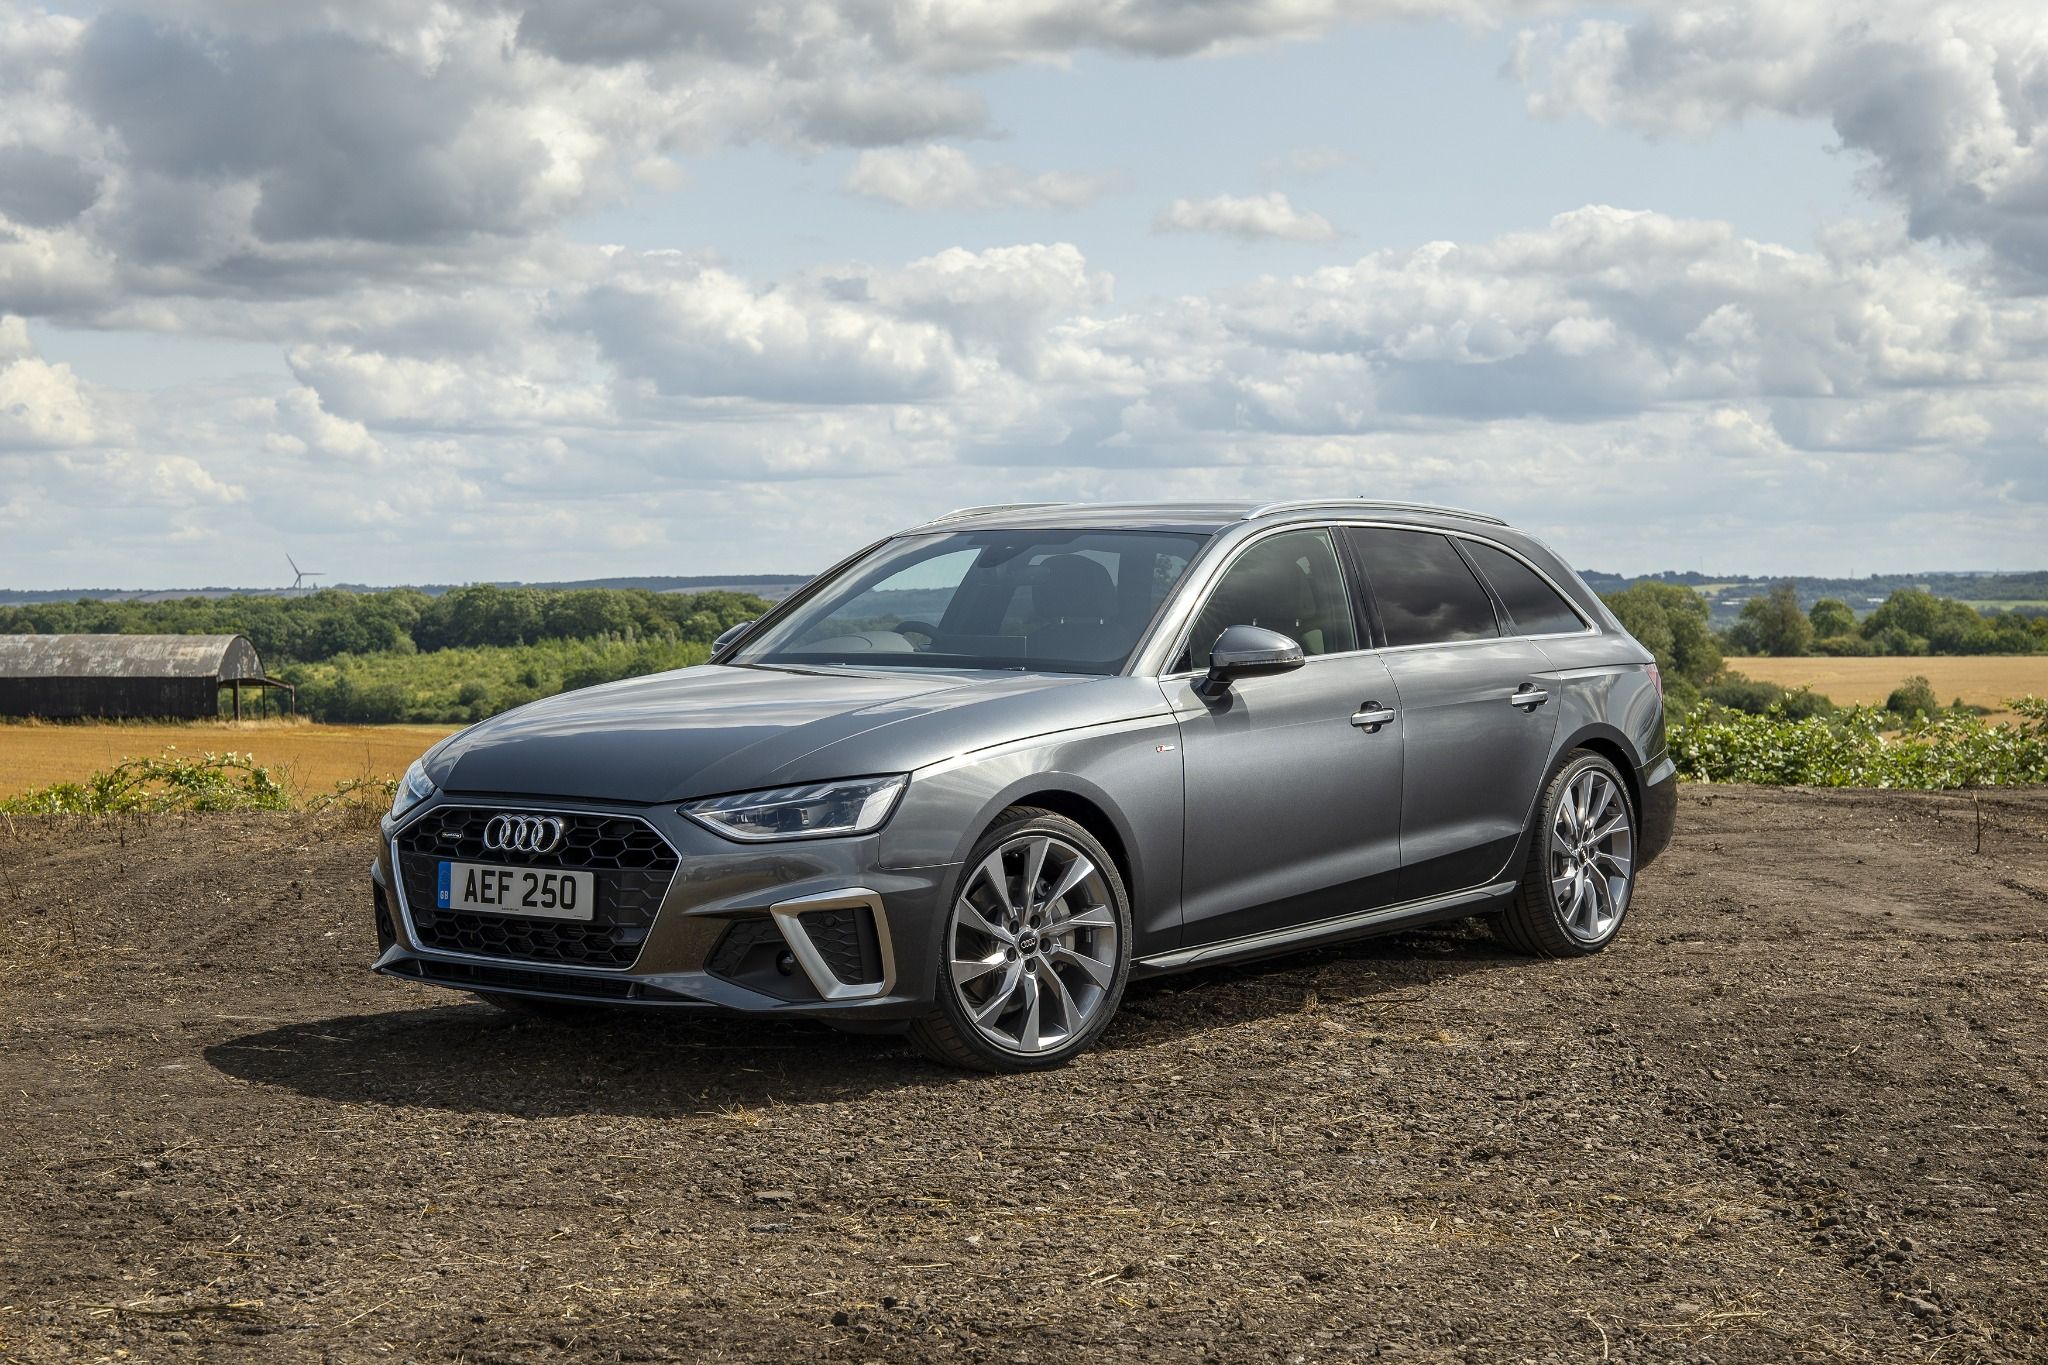 Audi A4 Avant in grey parked on gravel